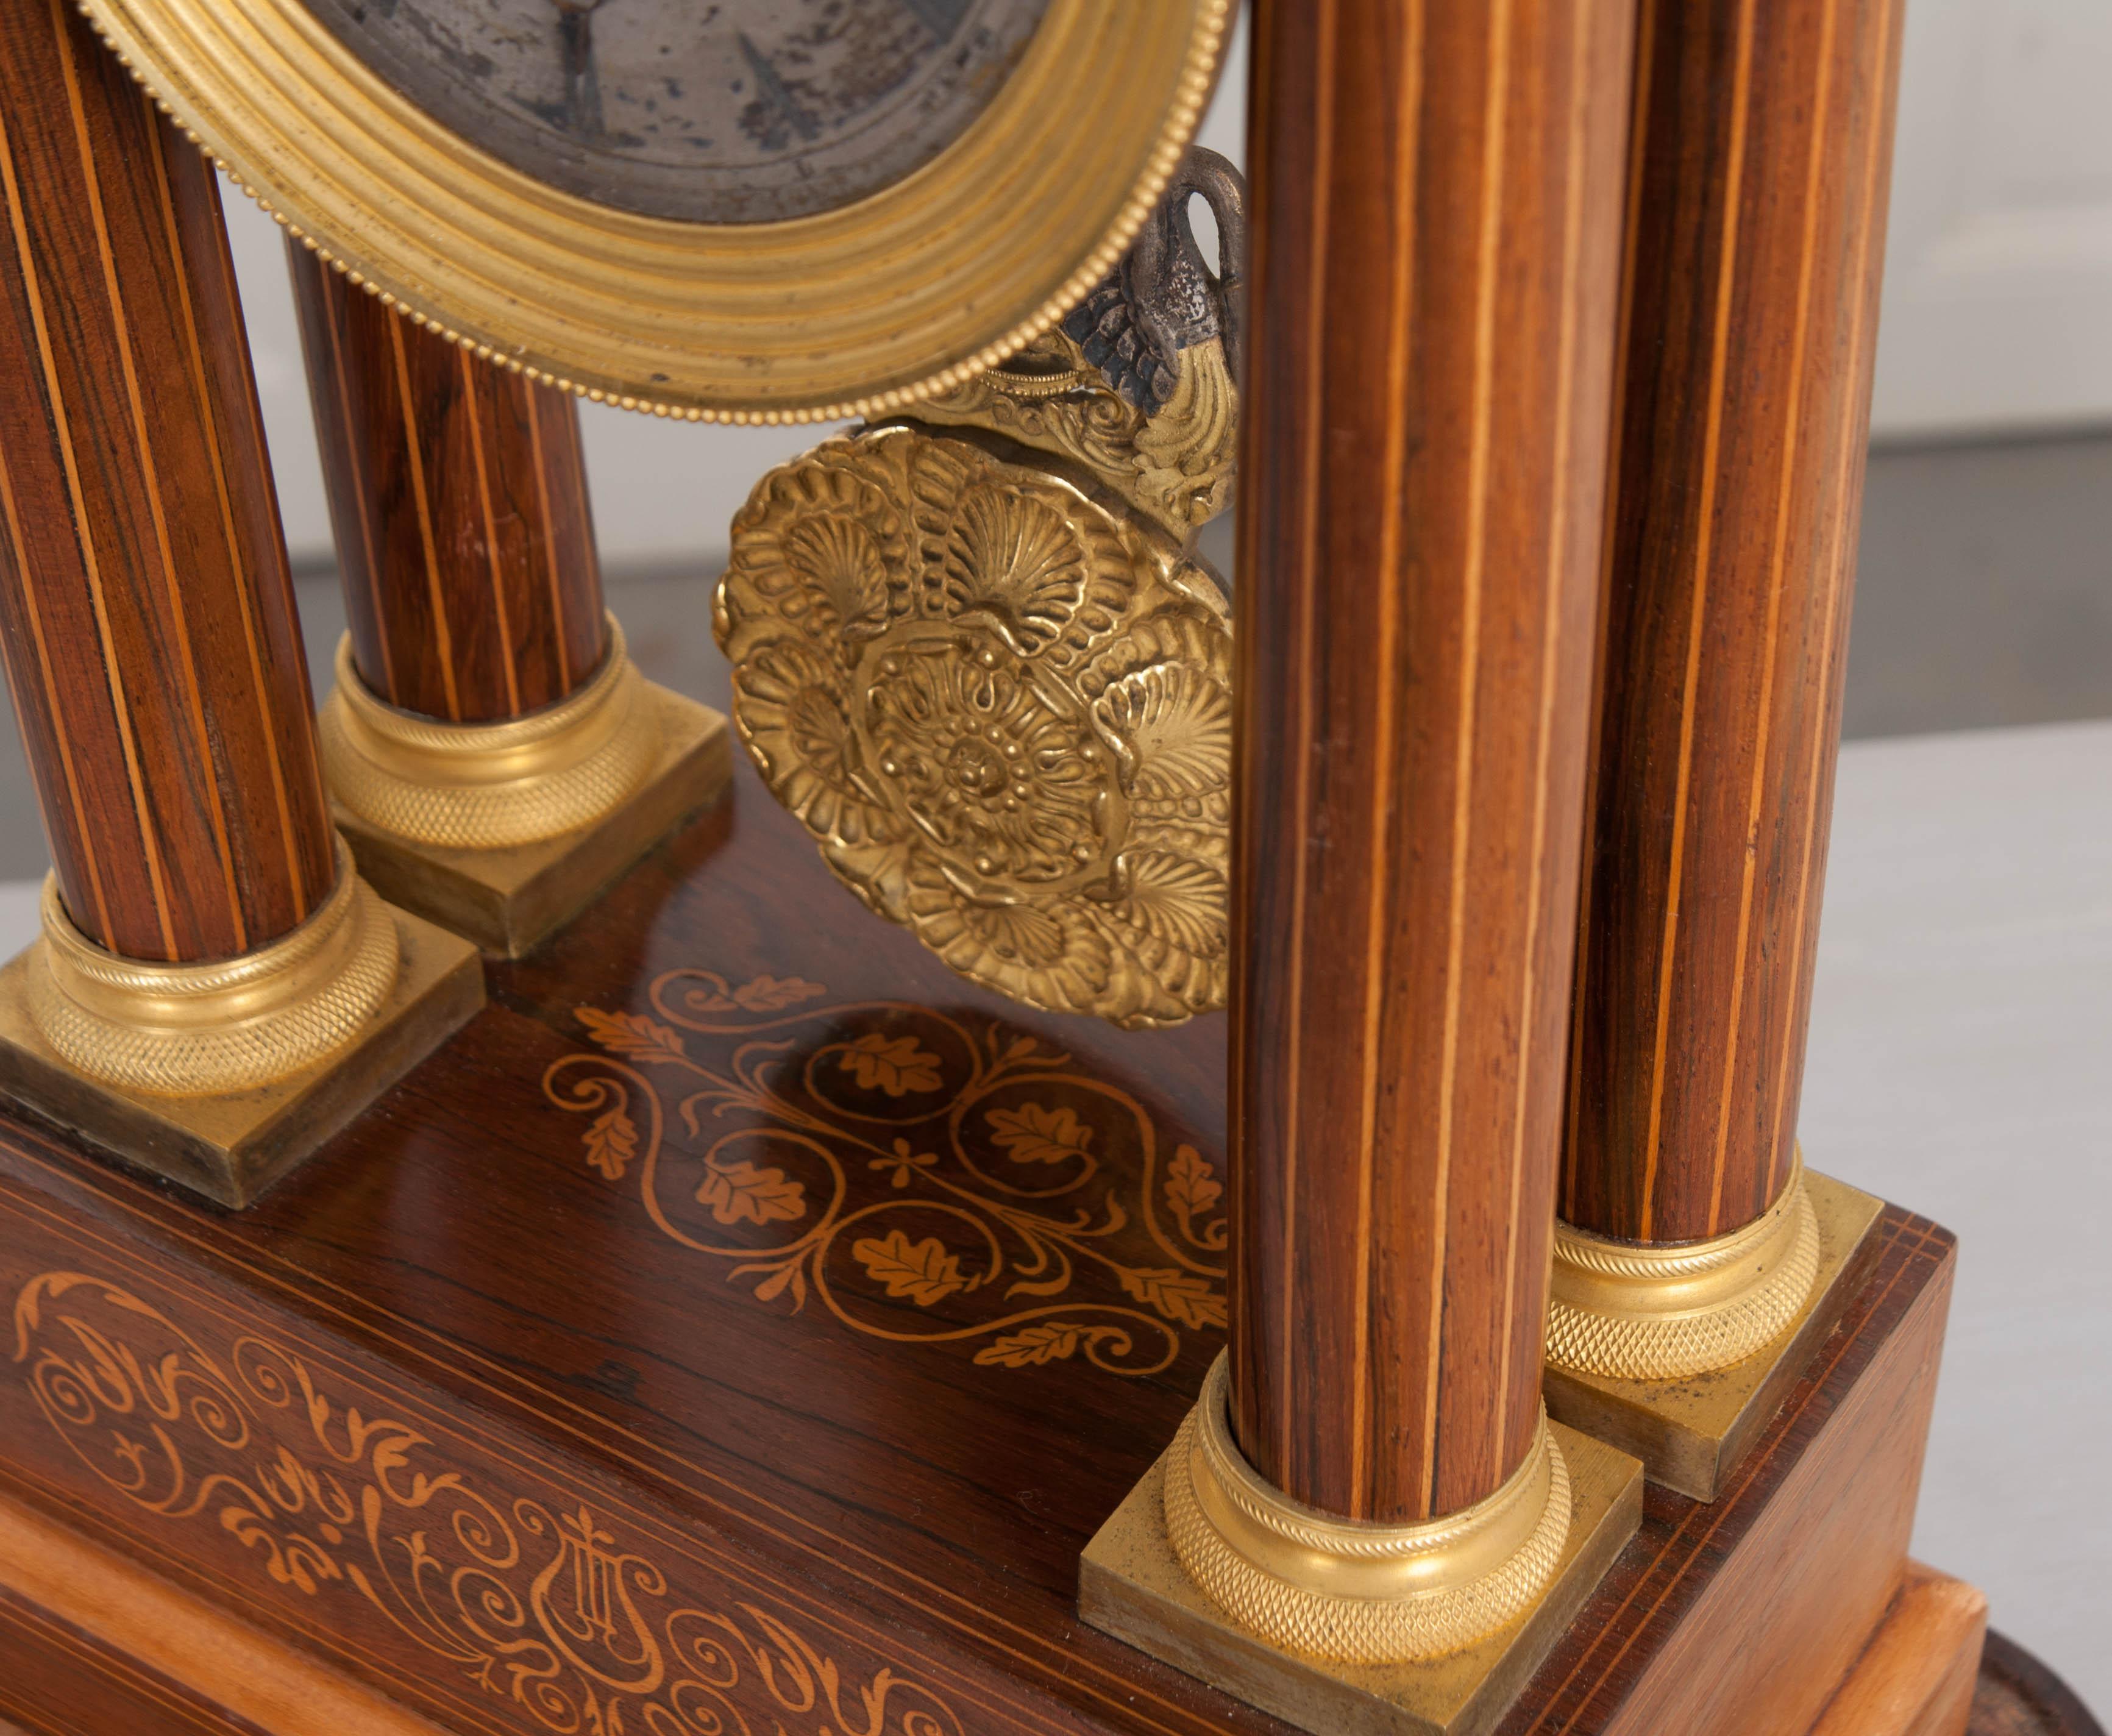 Fine 19th Century Marquetry-Inlaid Satinwood and Gilt-Bronze Portico Clock For Sale 3